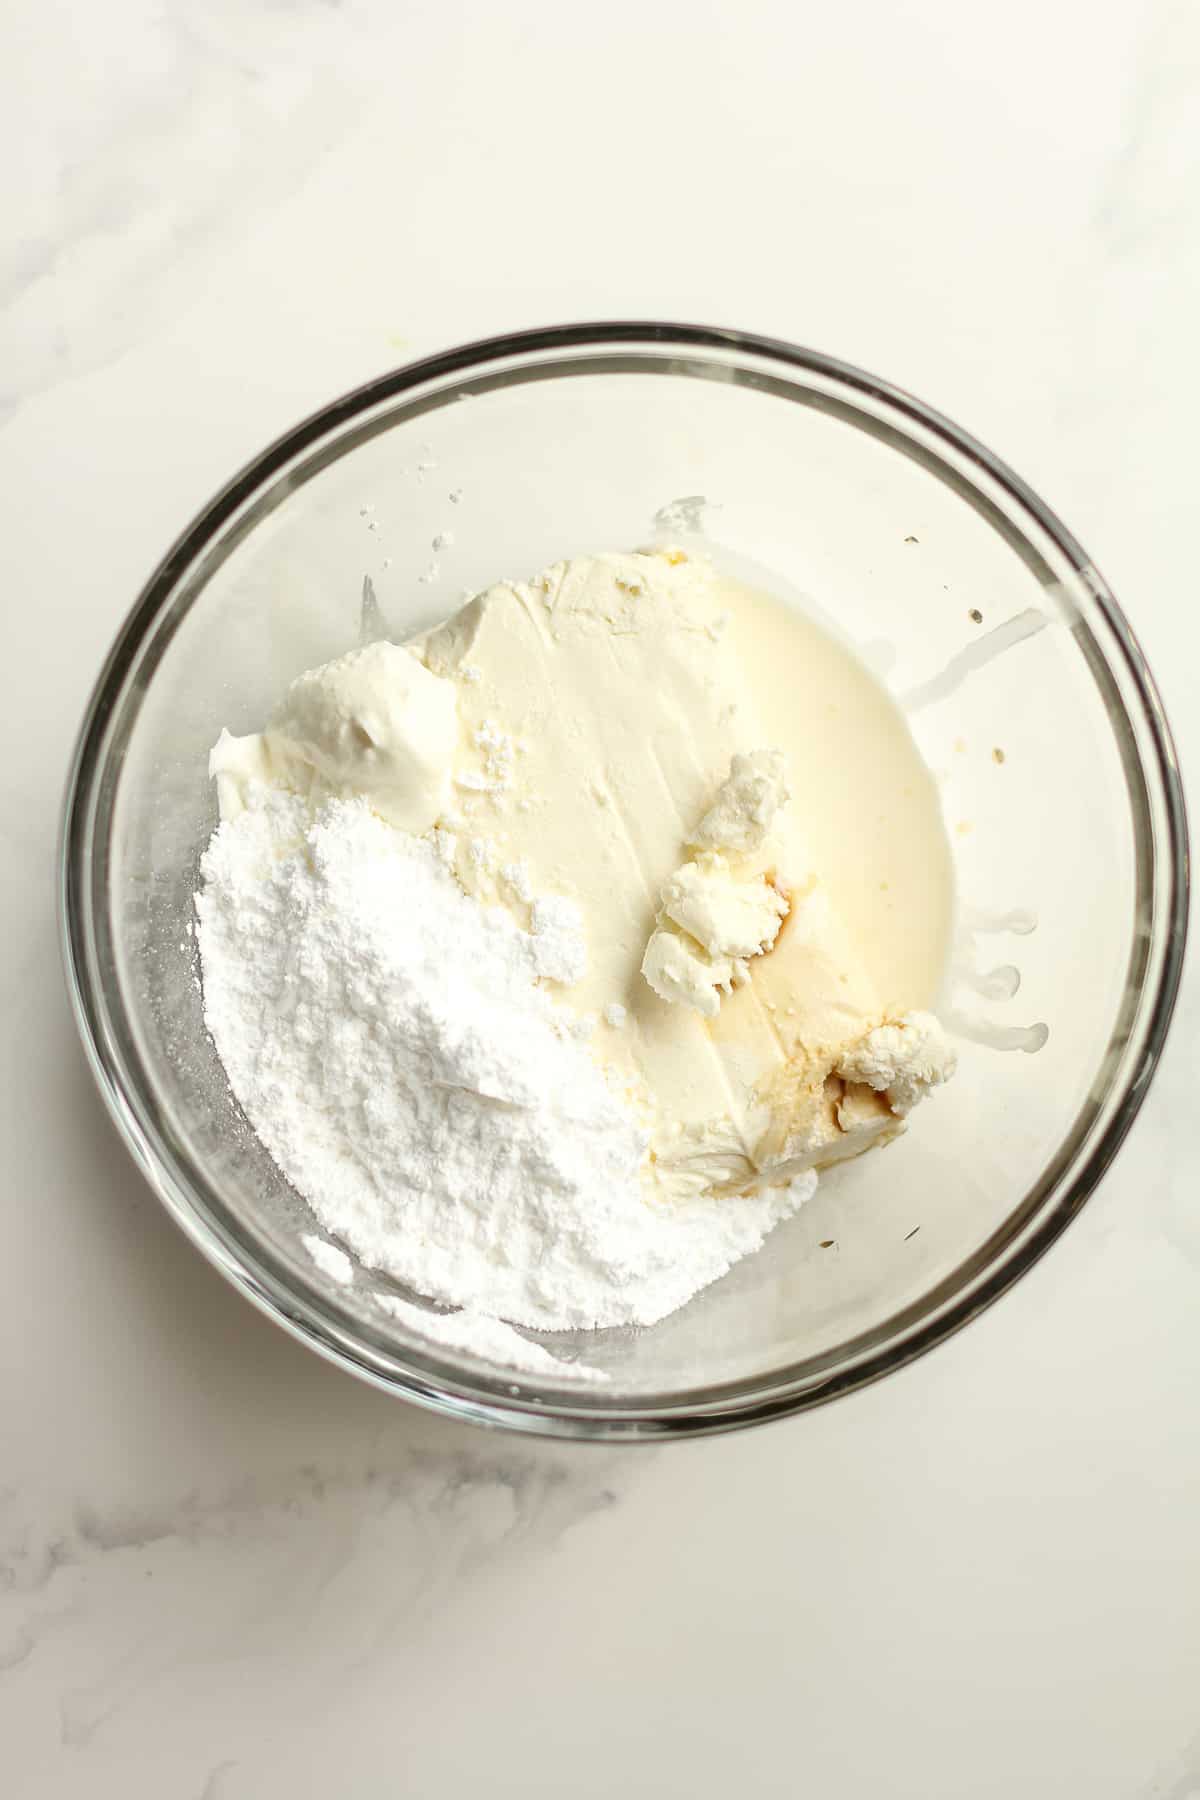 A bowl of the cream cheese filling ingredients, before mixing together.